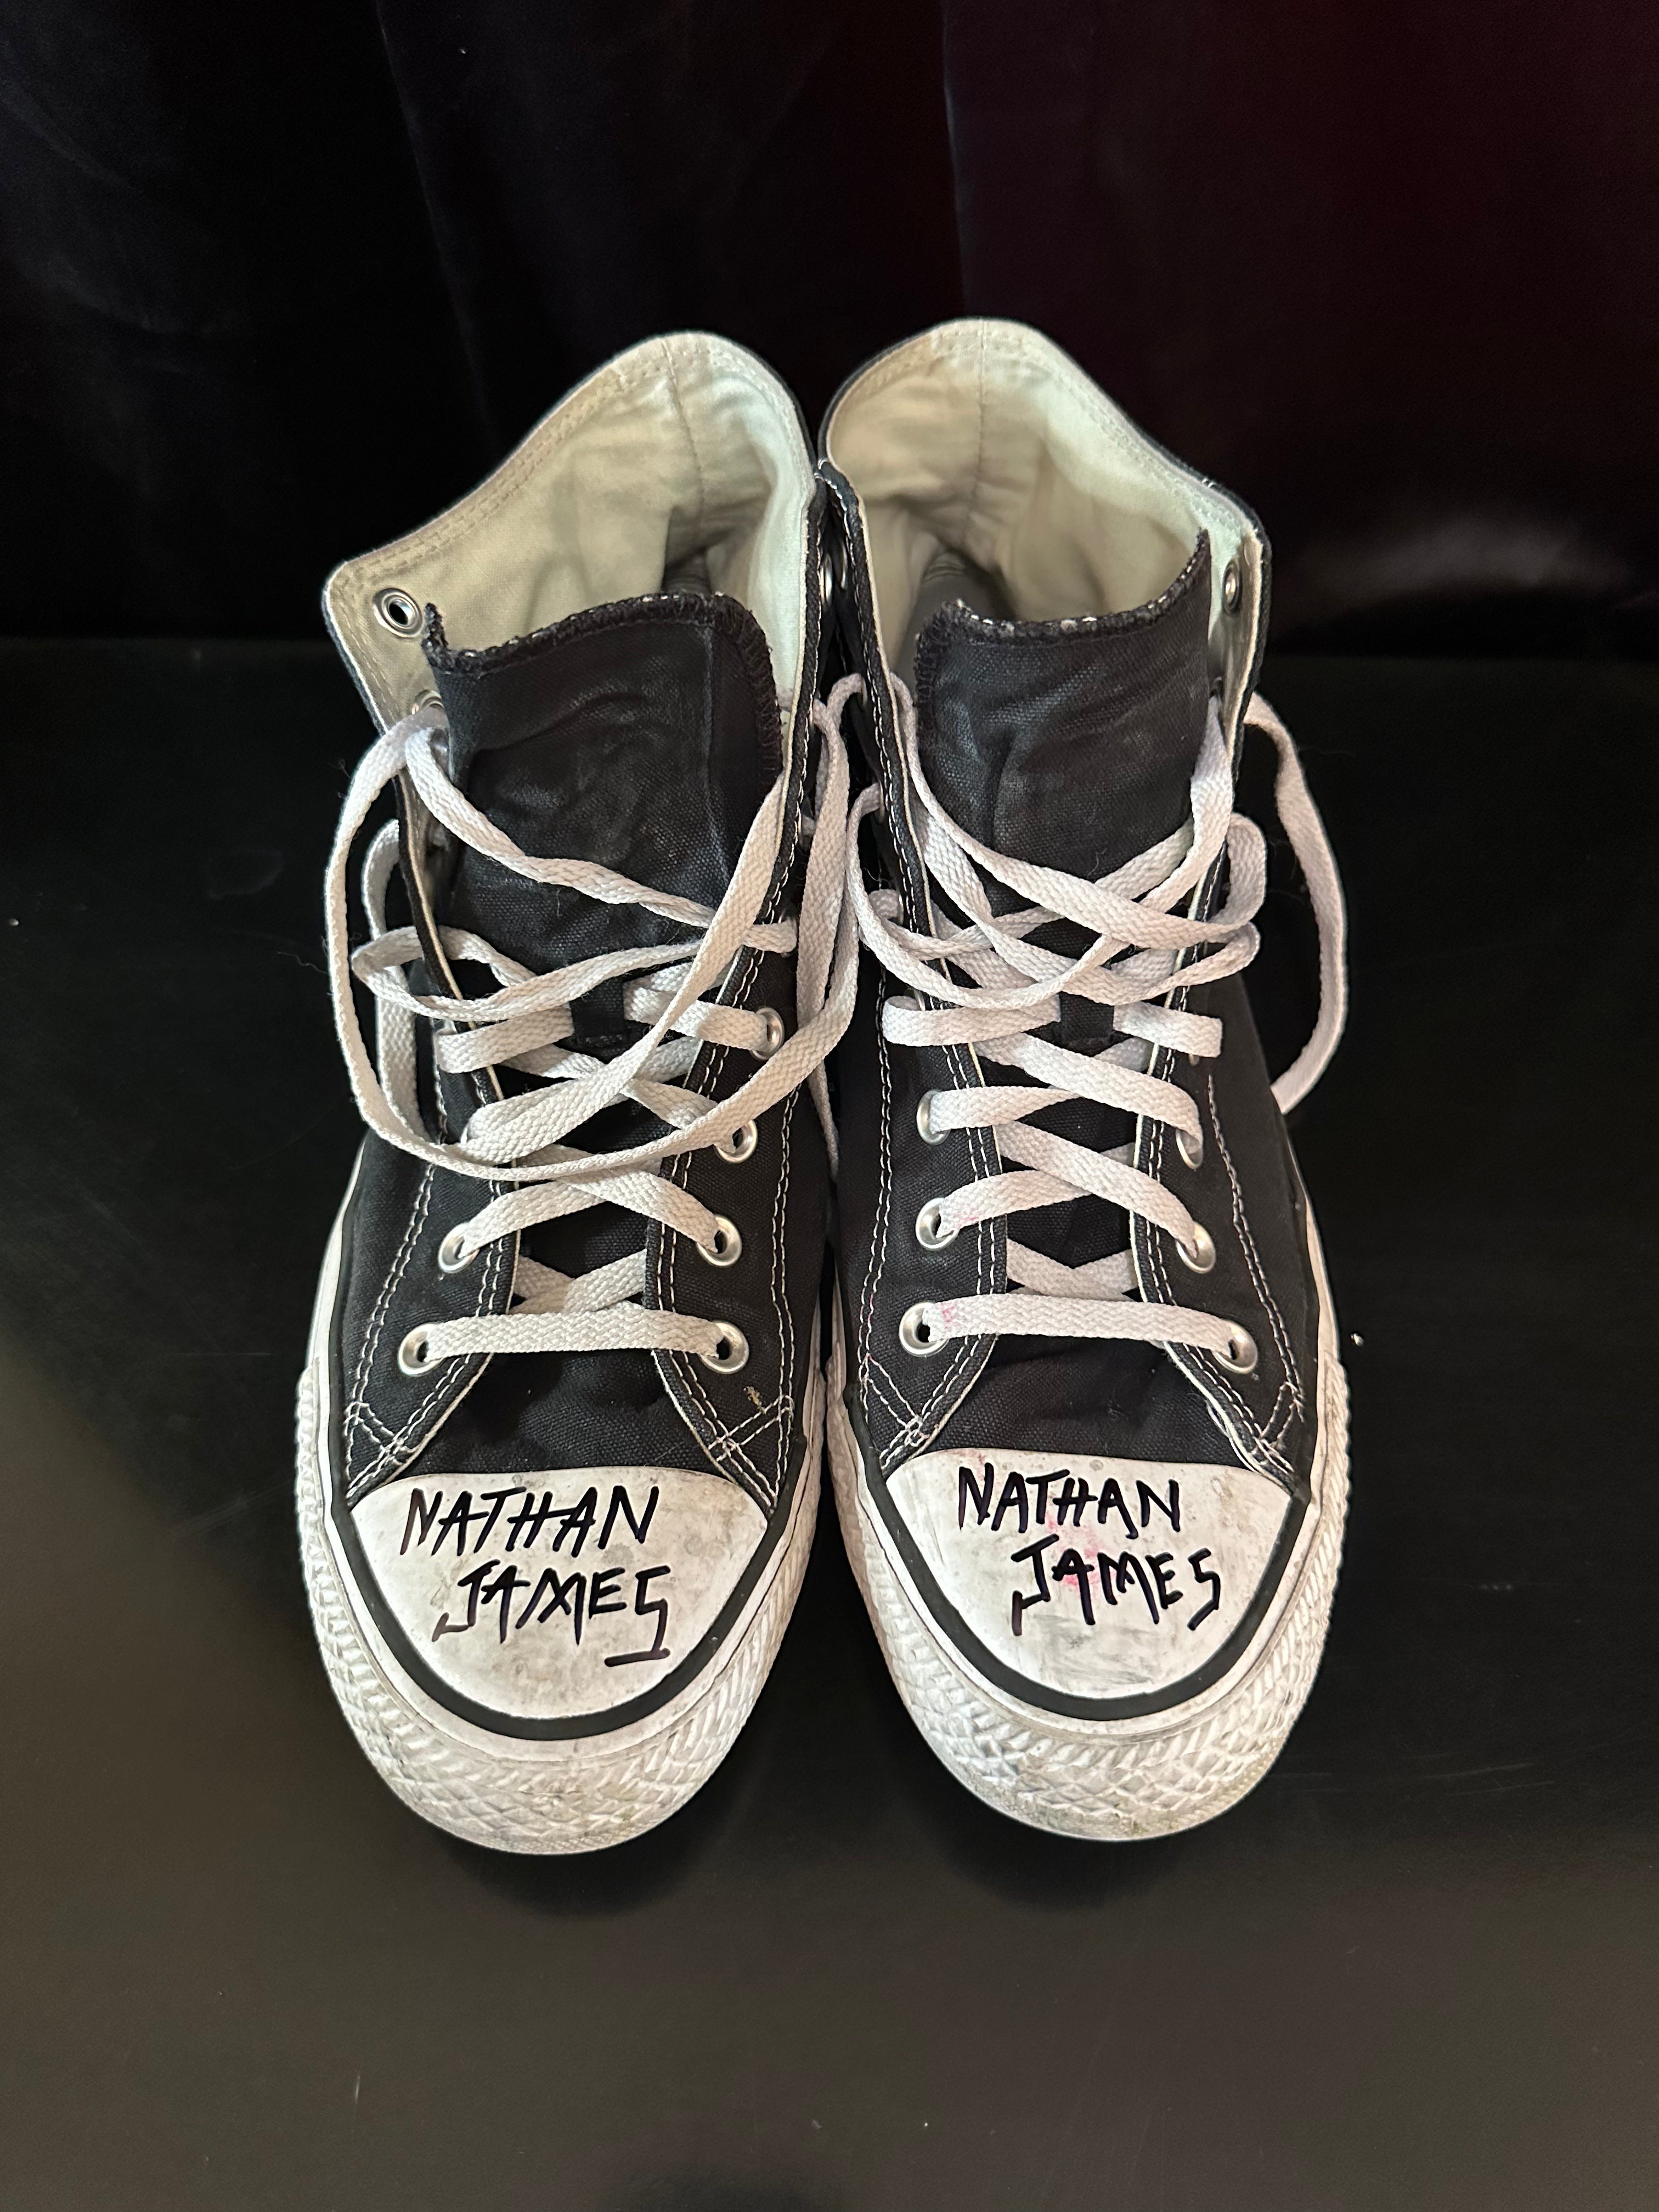 Exclusive: Signed Tour Converse